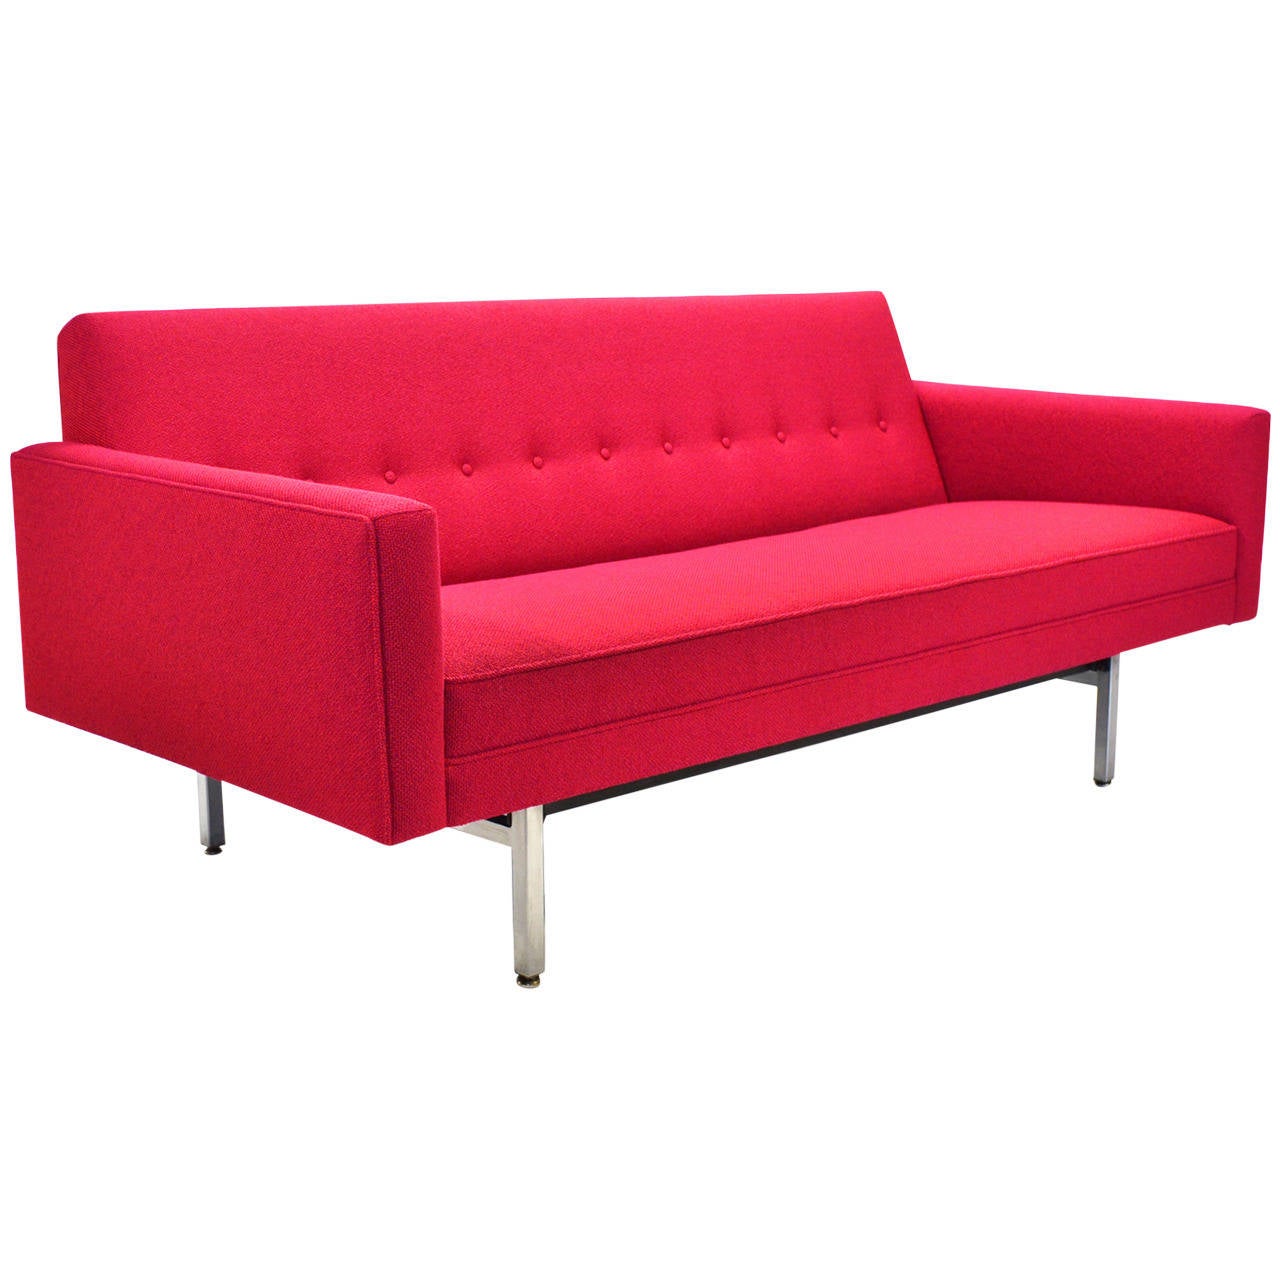 George Nelson Modular Group Sofa For Sale At 1stdibs